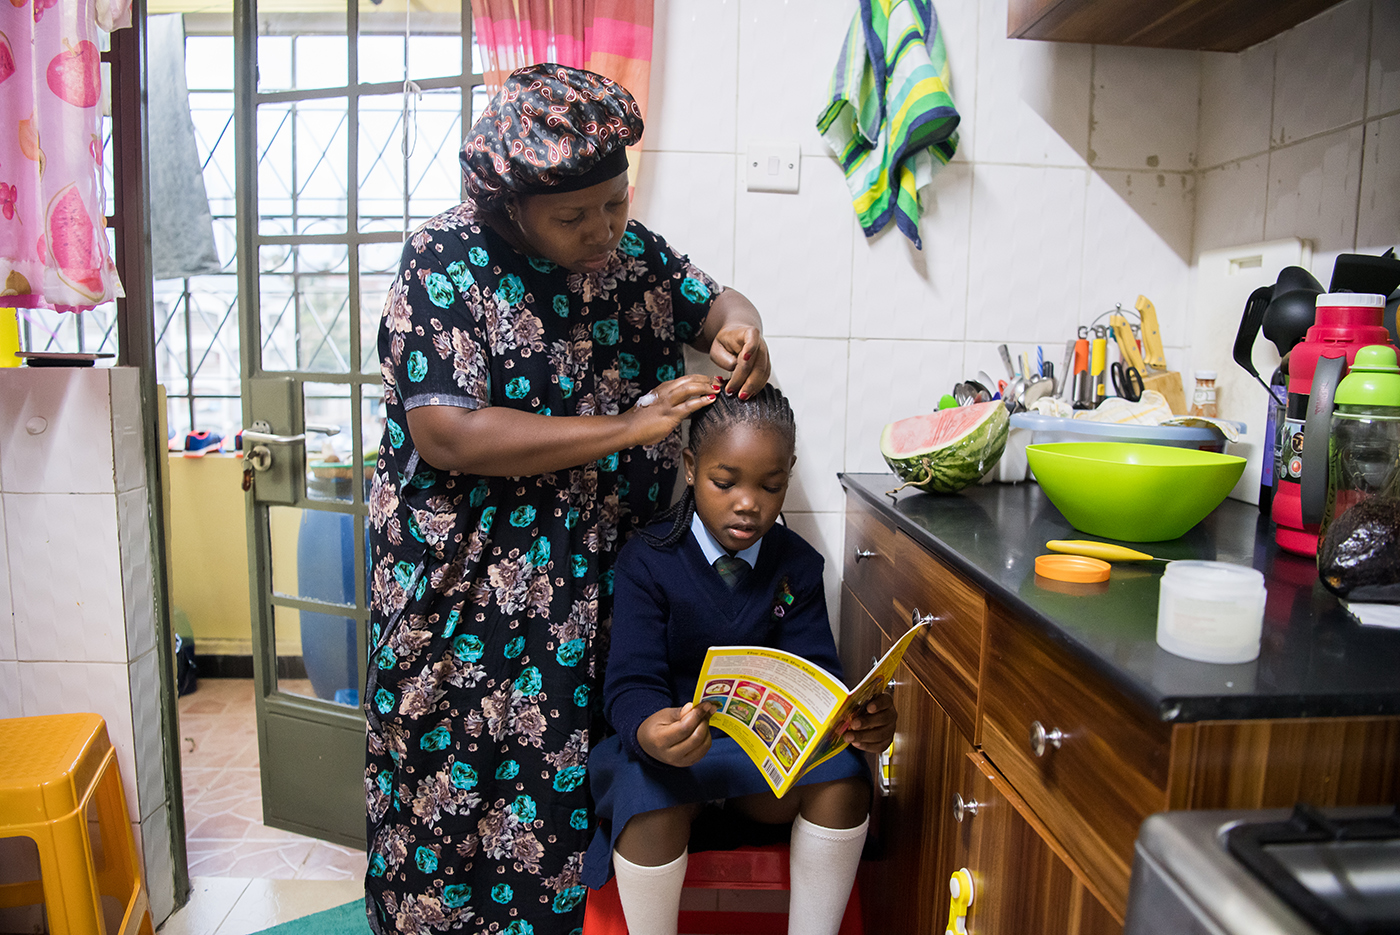 ©Gates Archive/Alissa Everett / Caption: Janet Memo helps her two children get ready for school while she cooks breakfast in her small apartment in Nairobi, Kenya on February 22, 2021. The COVID-19 pandemic has challenged many women to balance working from home and caring for their children. 